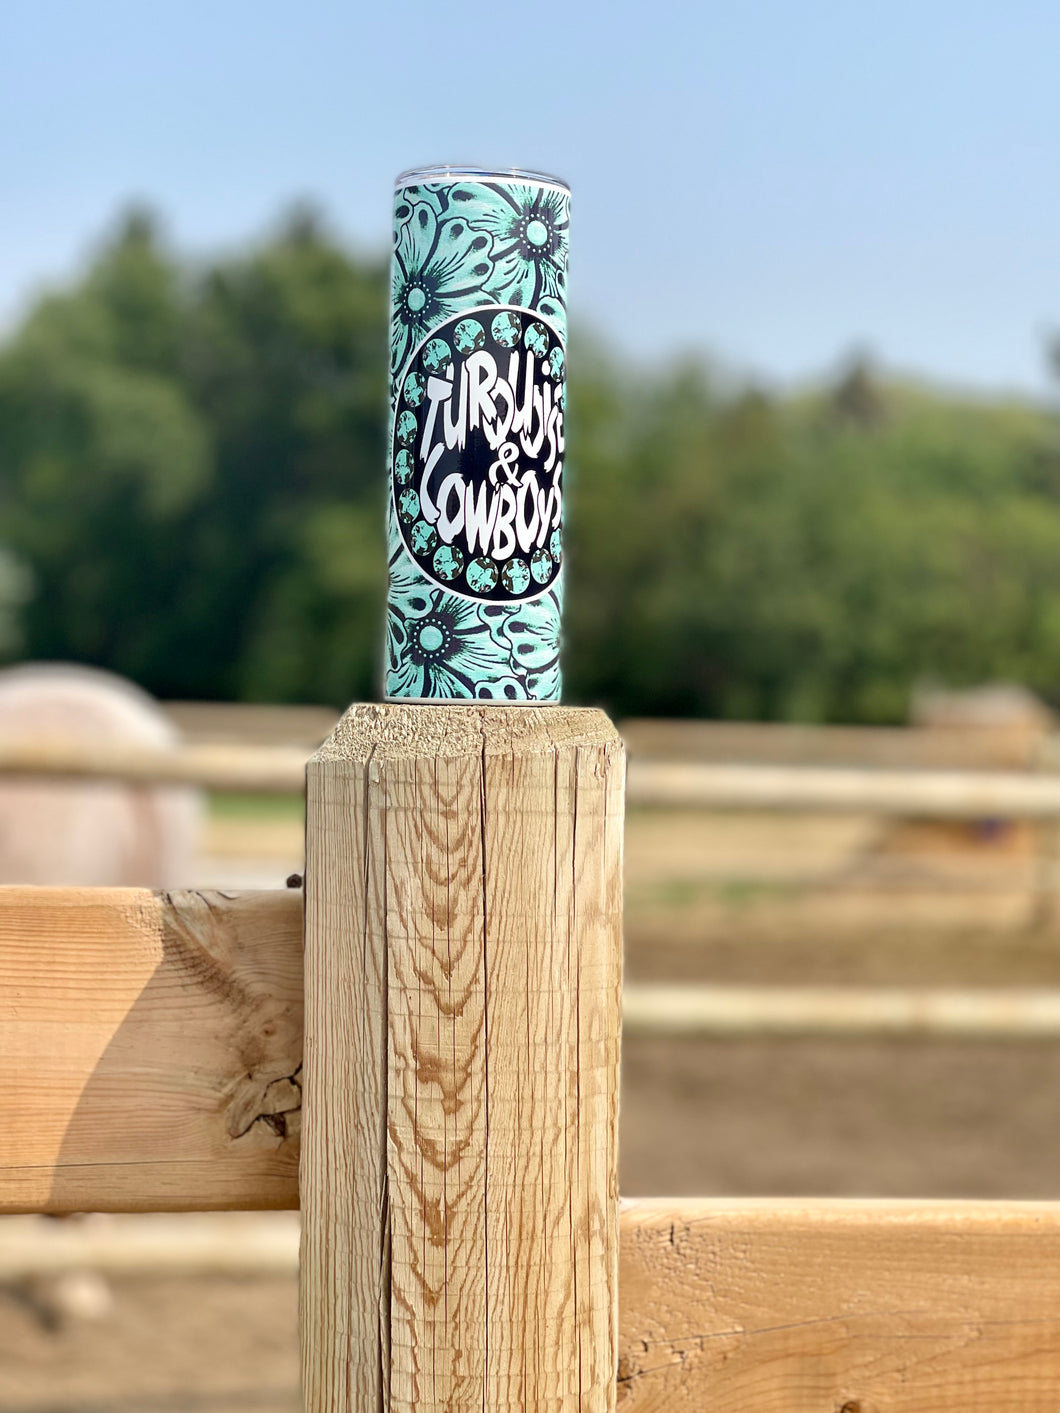 Turquoise and Cowboys Tumbler